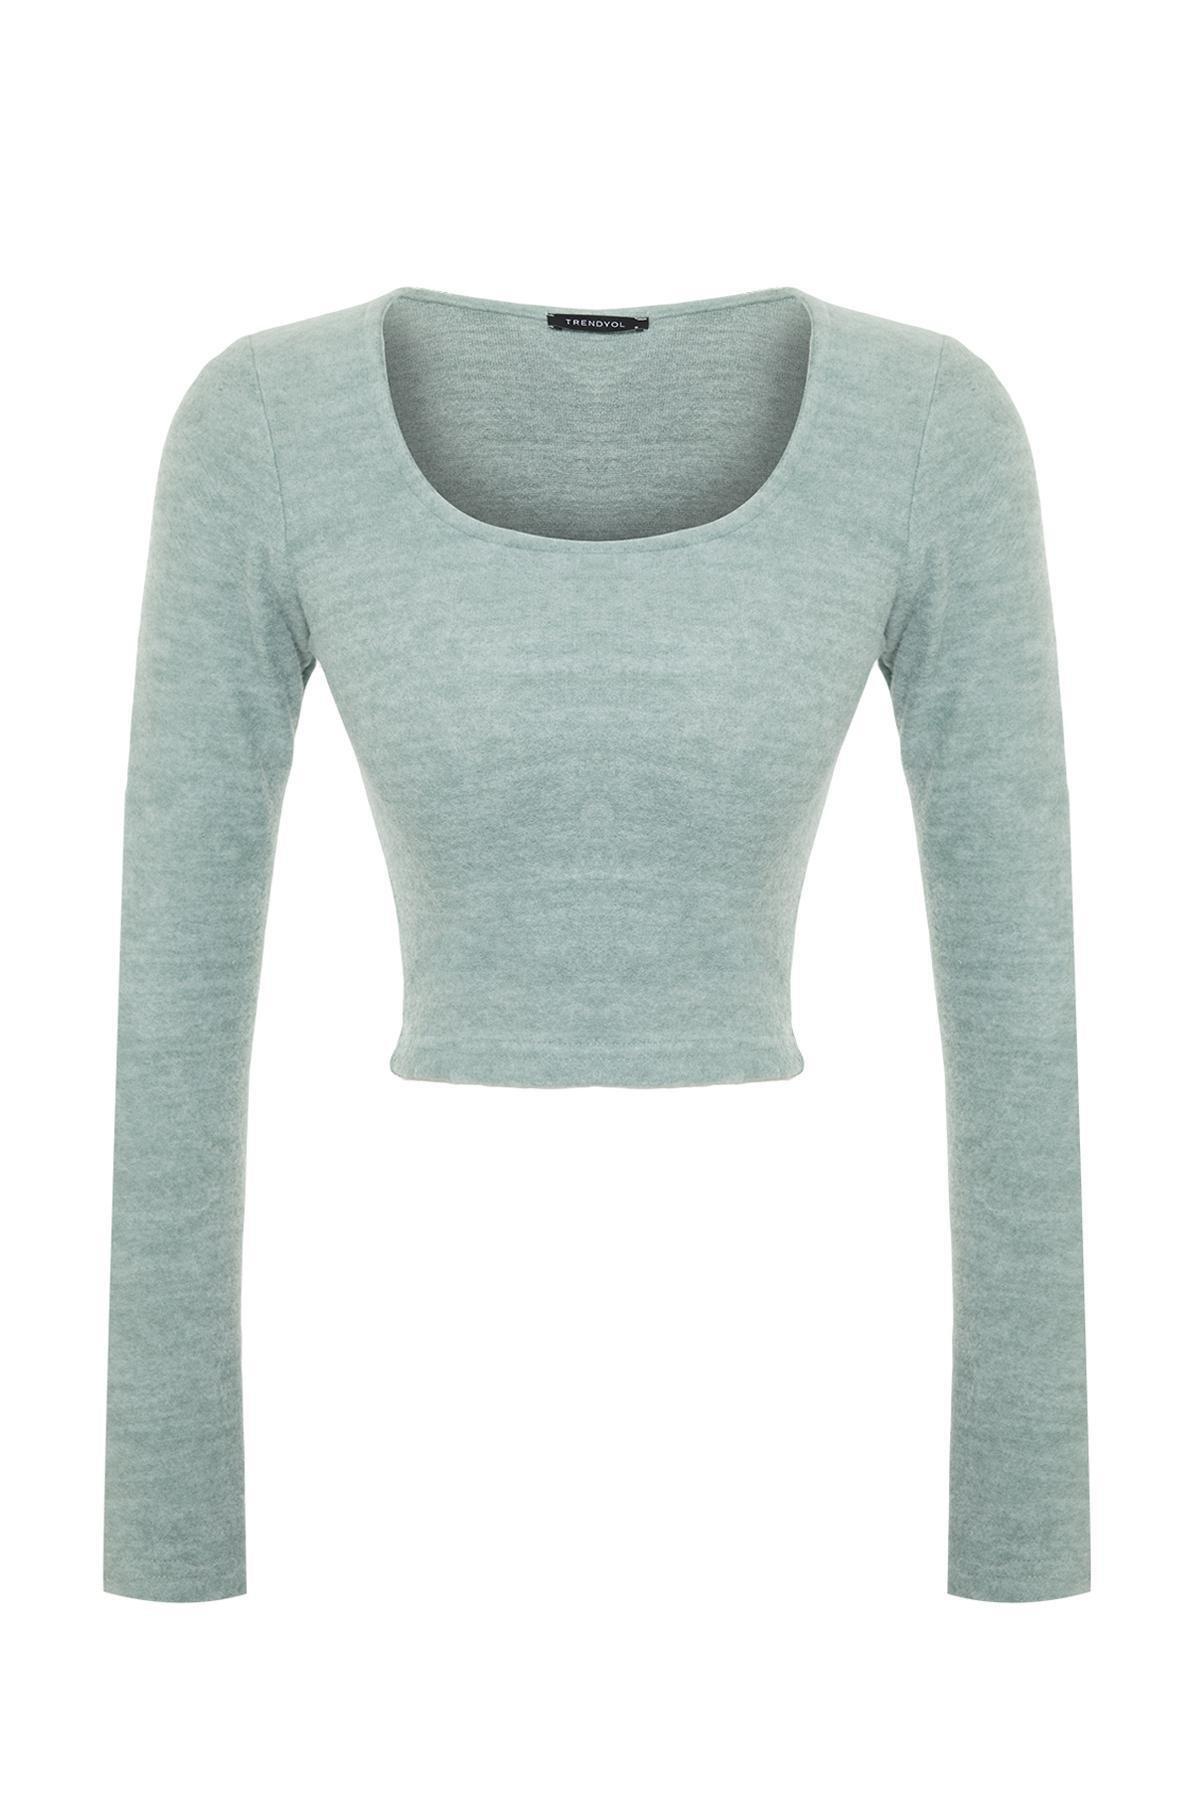 Trendyol - Green Collared Fitted Crop Knitted Blouse